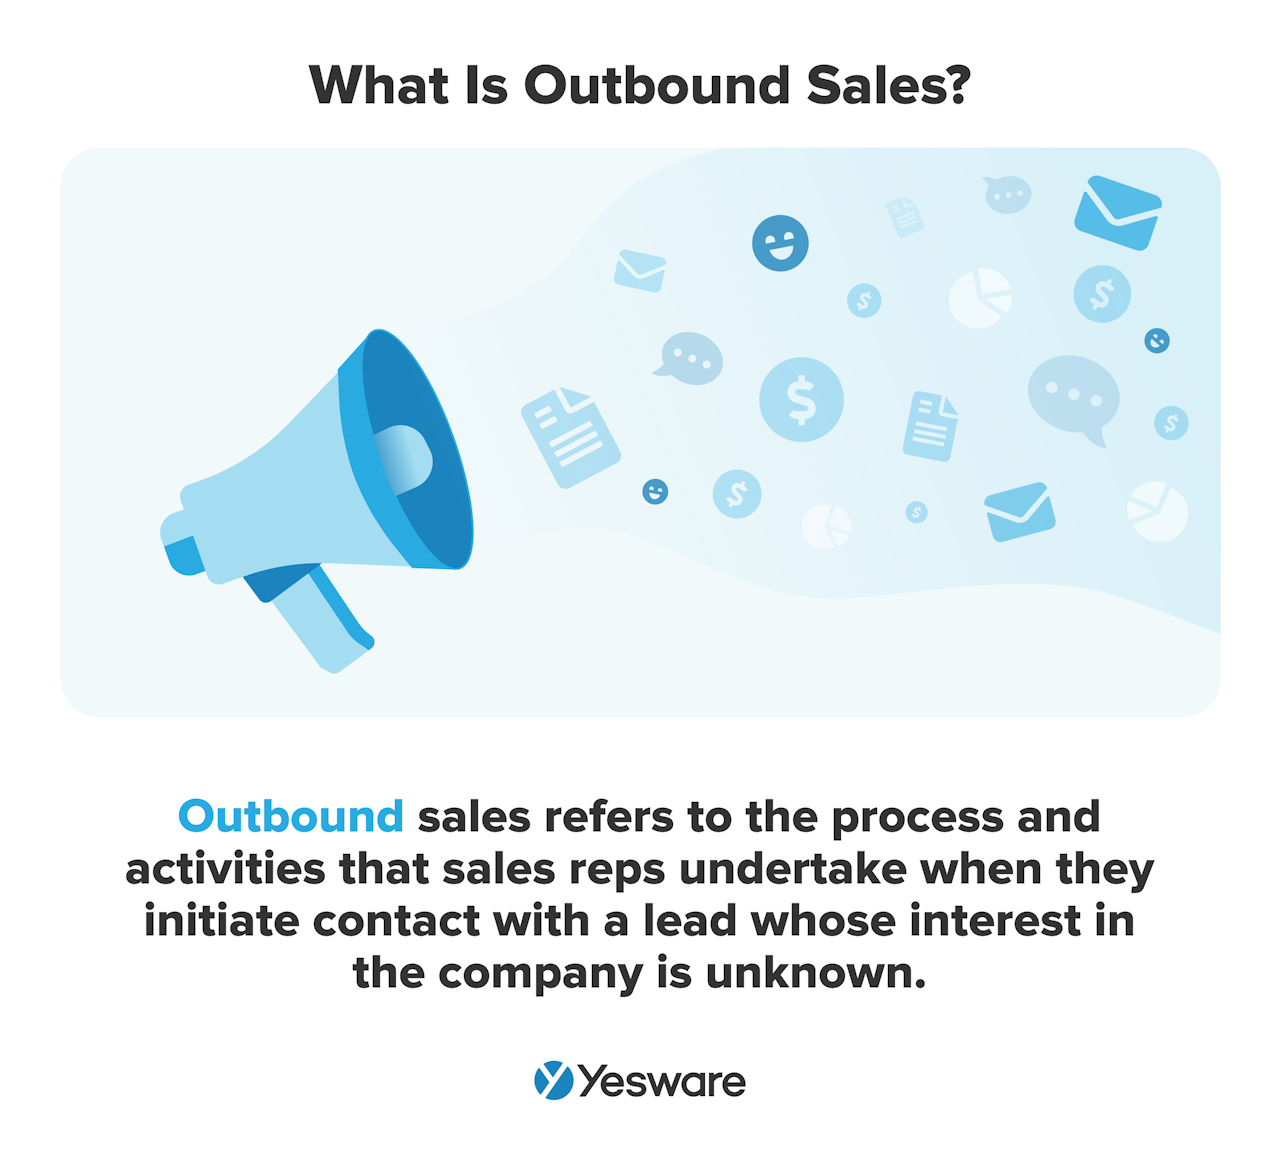 what is outbound sales?